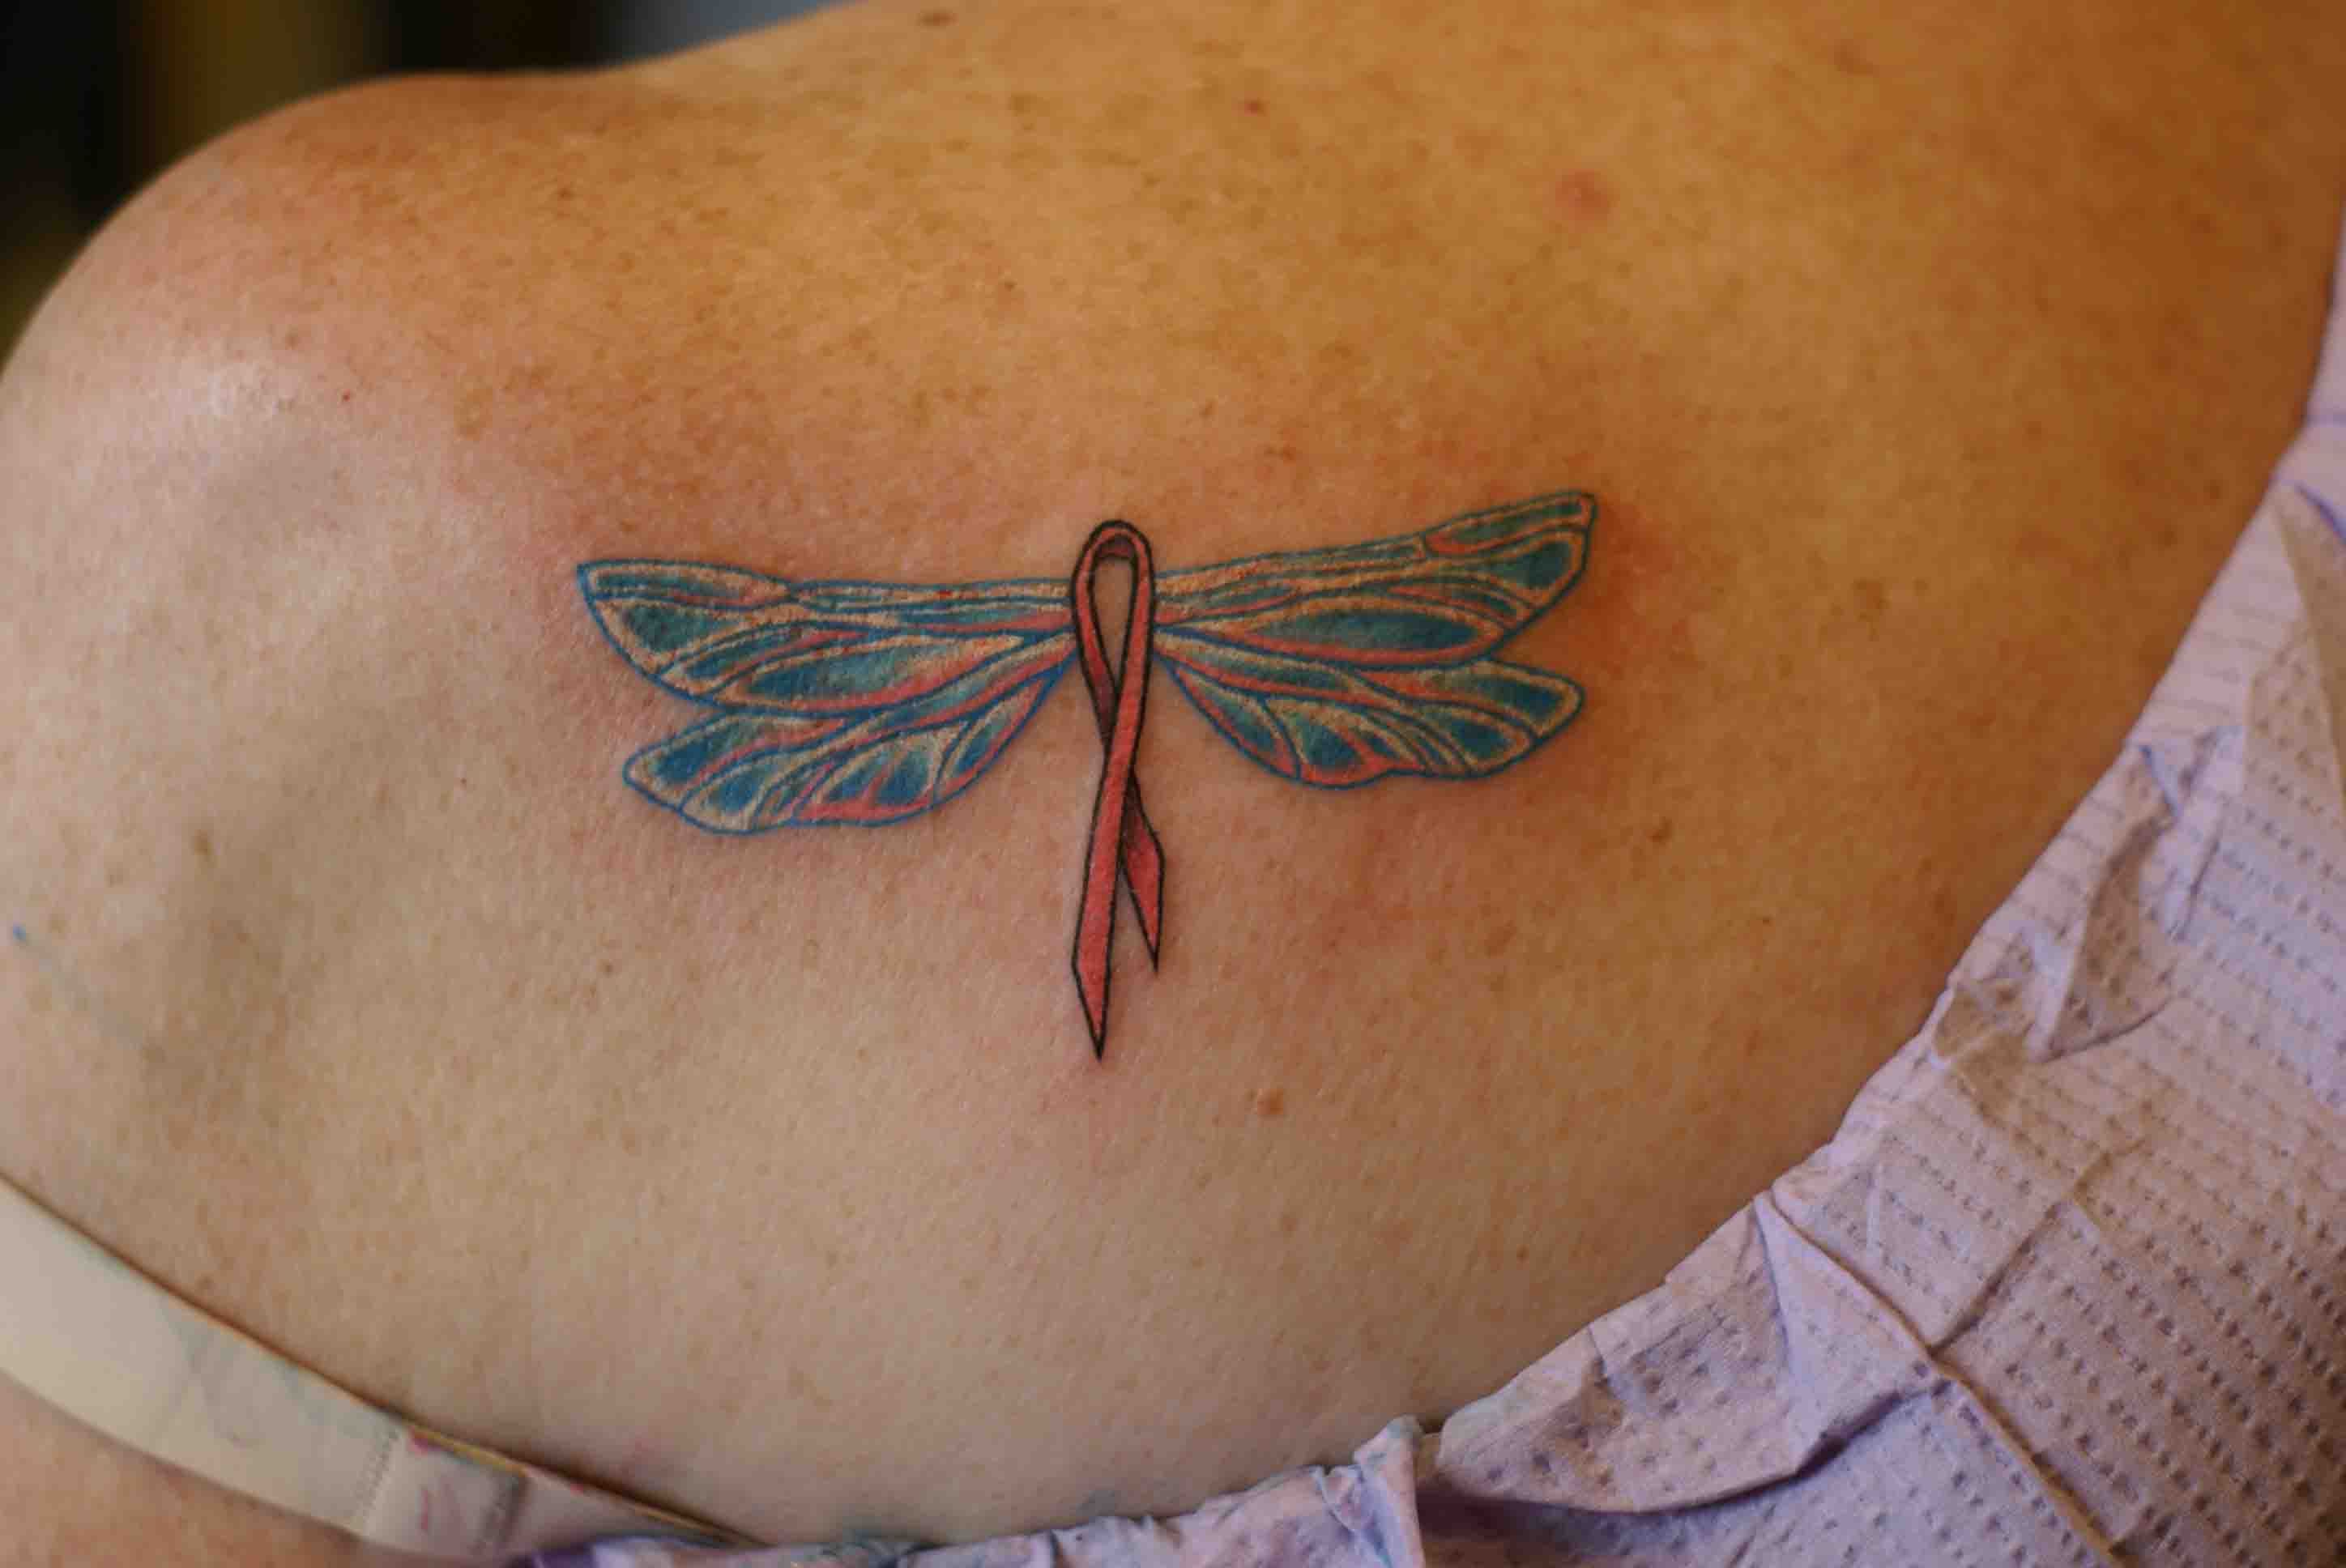 Dragon Fly tattoo for breast cancer awareness on a woman's back